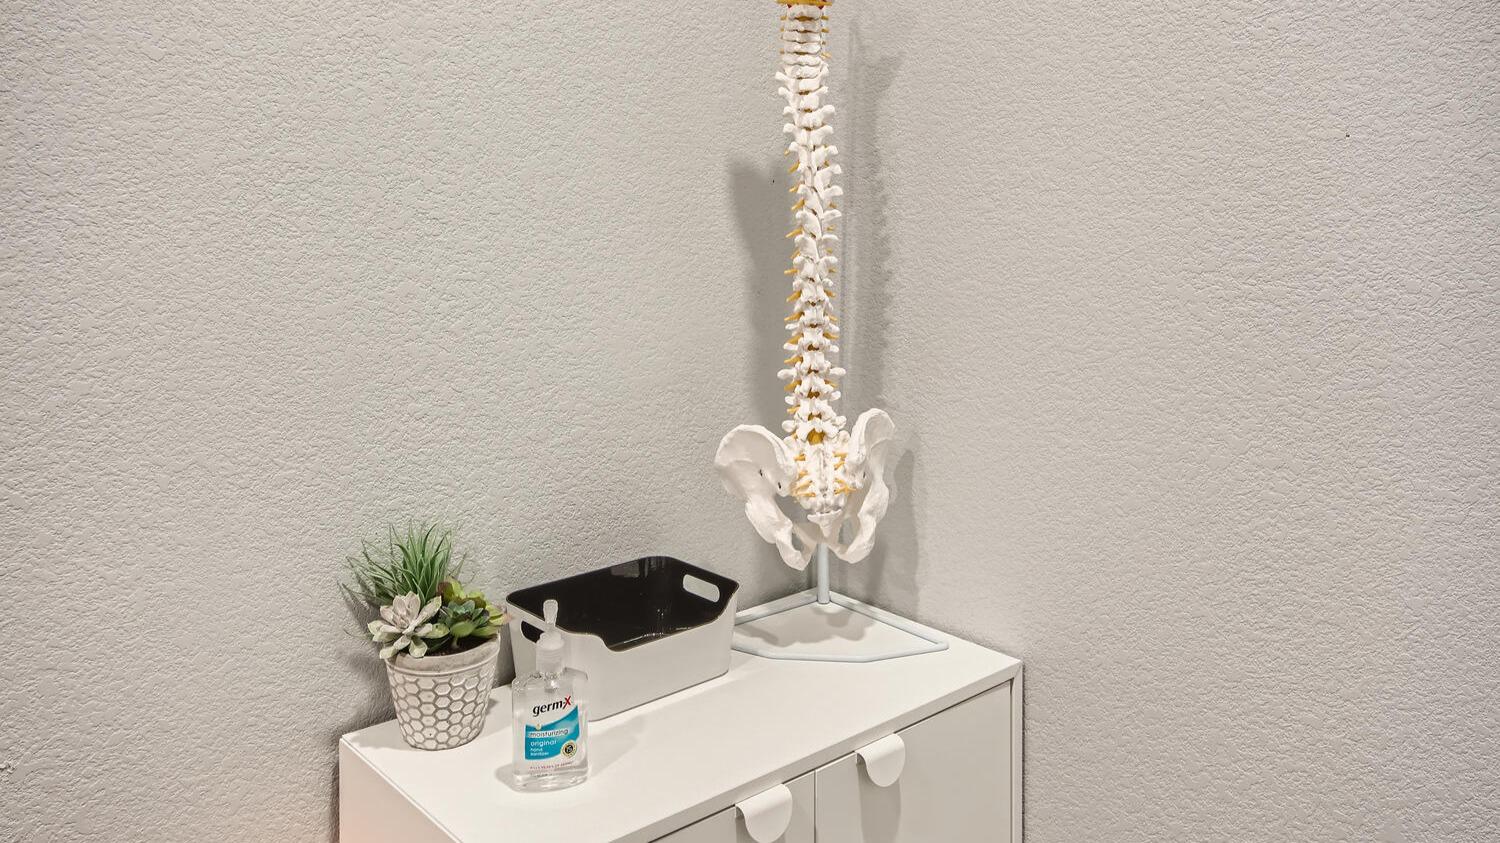 NuSpine Chiropractic provides convenient retail locations, Evening and weekend hours, maximum 15-minute visits, and online payments and check-ins.